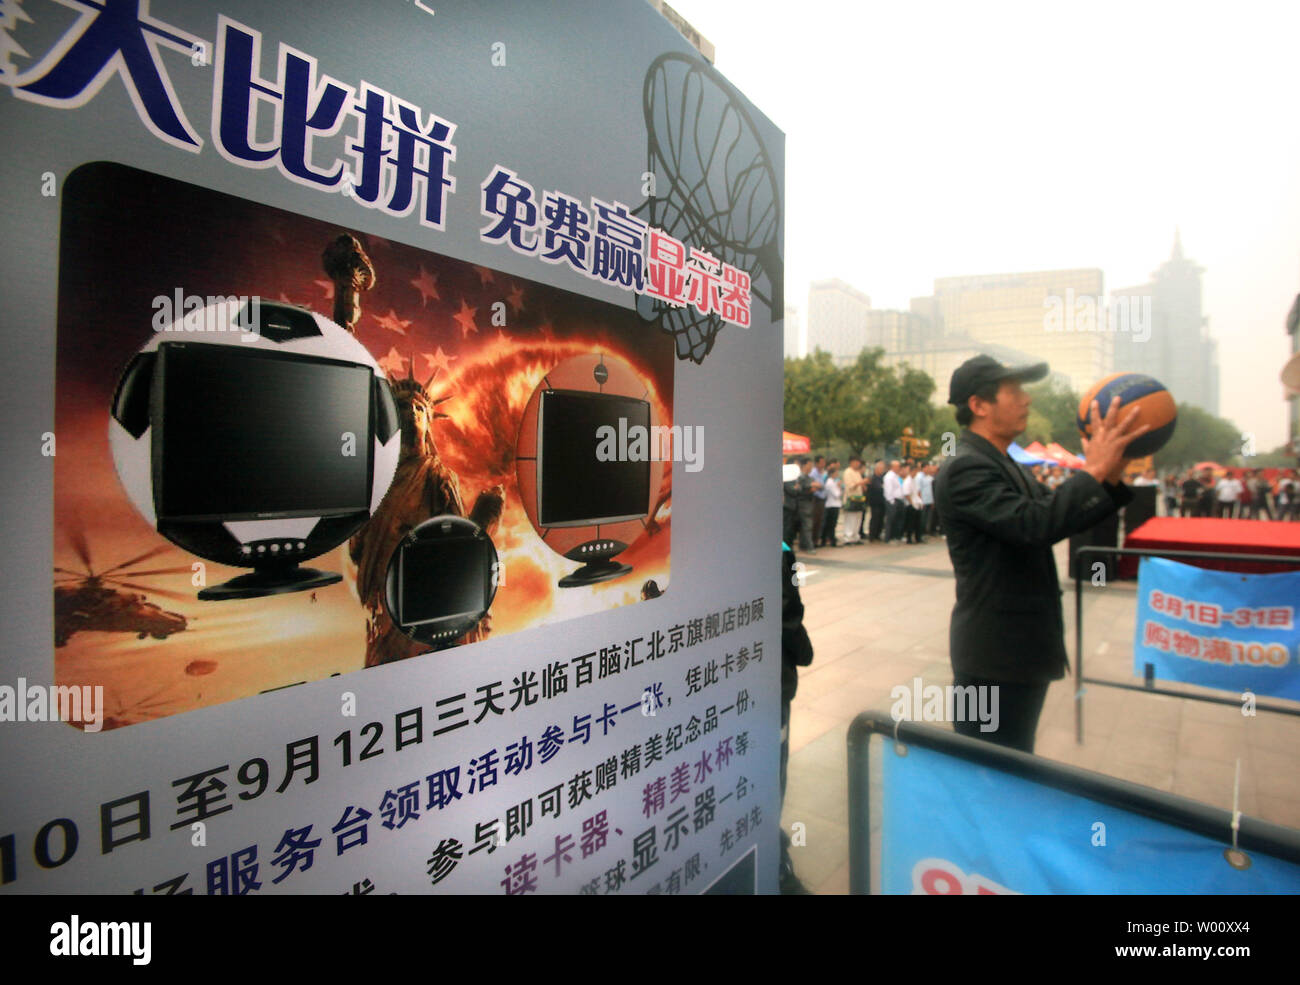 A Chinese migrant worker tries his hand at shooting hoops for a chance to win inexpensive gifts at an electronics fair promoting computer sales coinciding with students returning to school in Beijing on September 12, 2011.  Some of the stalls used images of American icons of liberty and war to advertise their goods.     UPI/Stephen Shaver Stock Photo